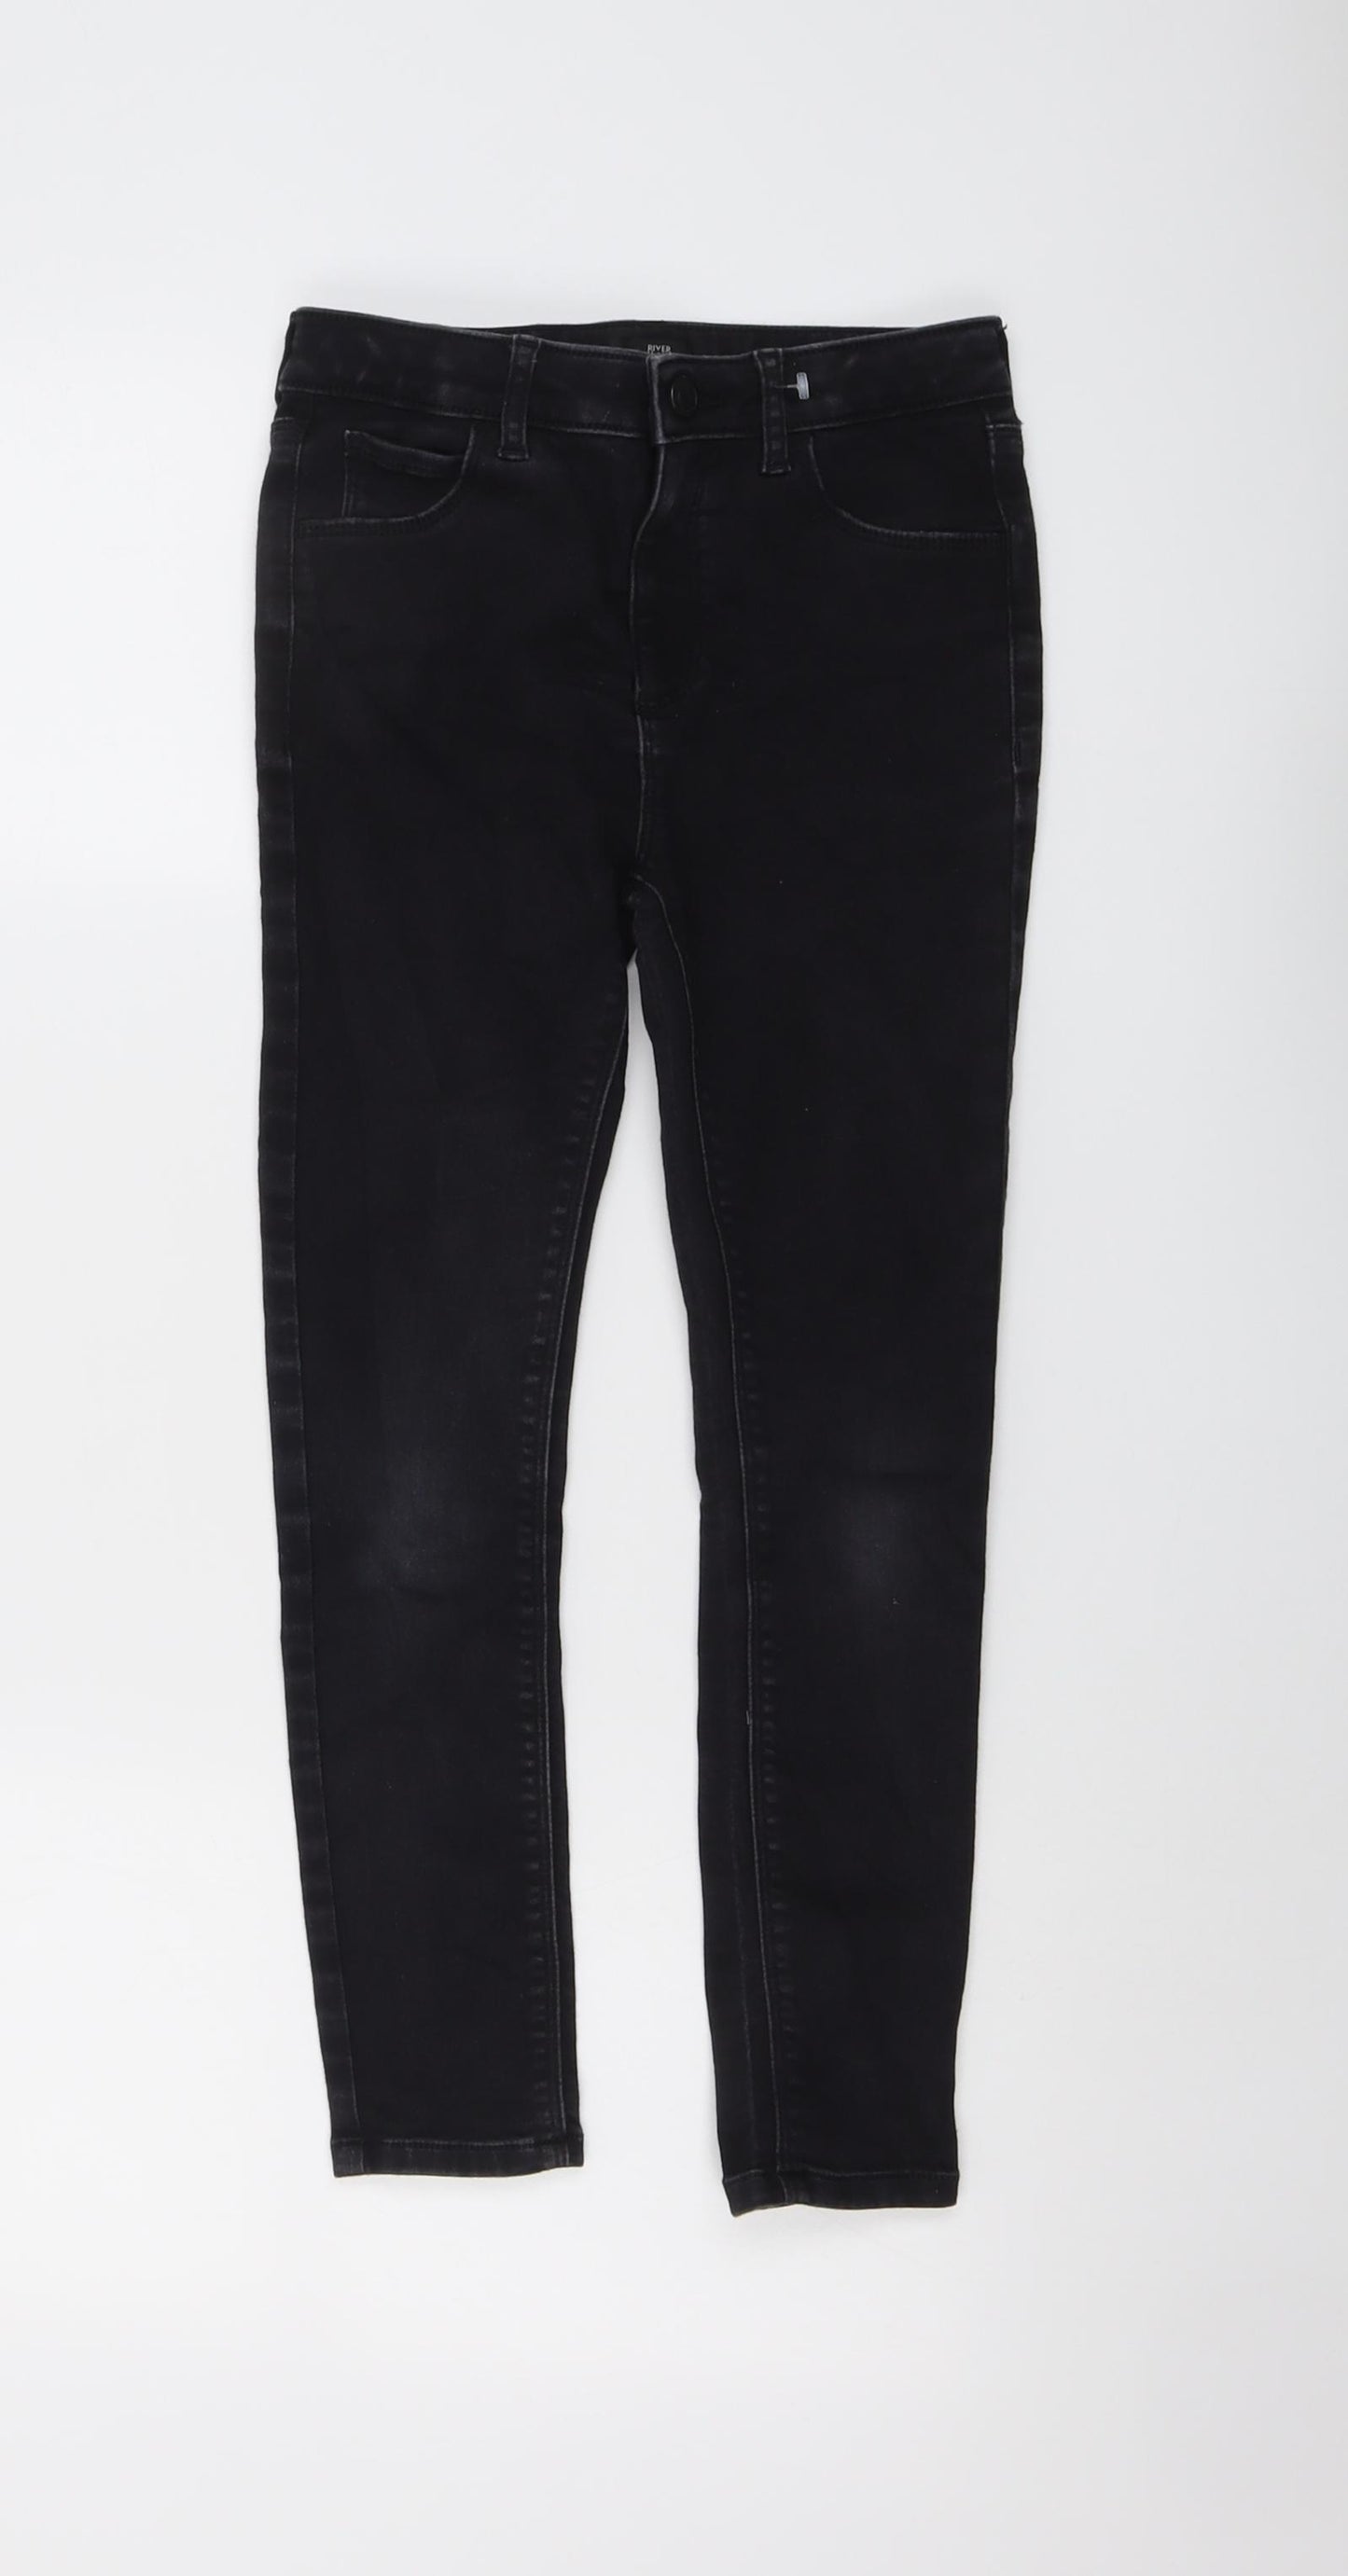 River Island Boys Black Cotton Skinny Jeans Size 10 Years Regular Button